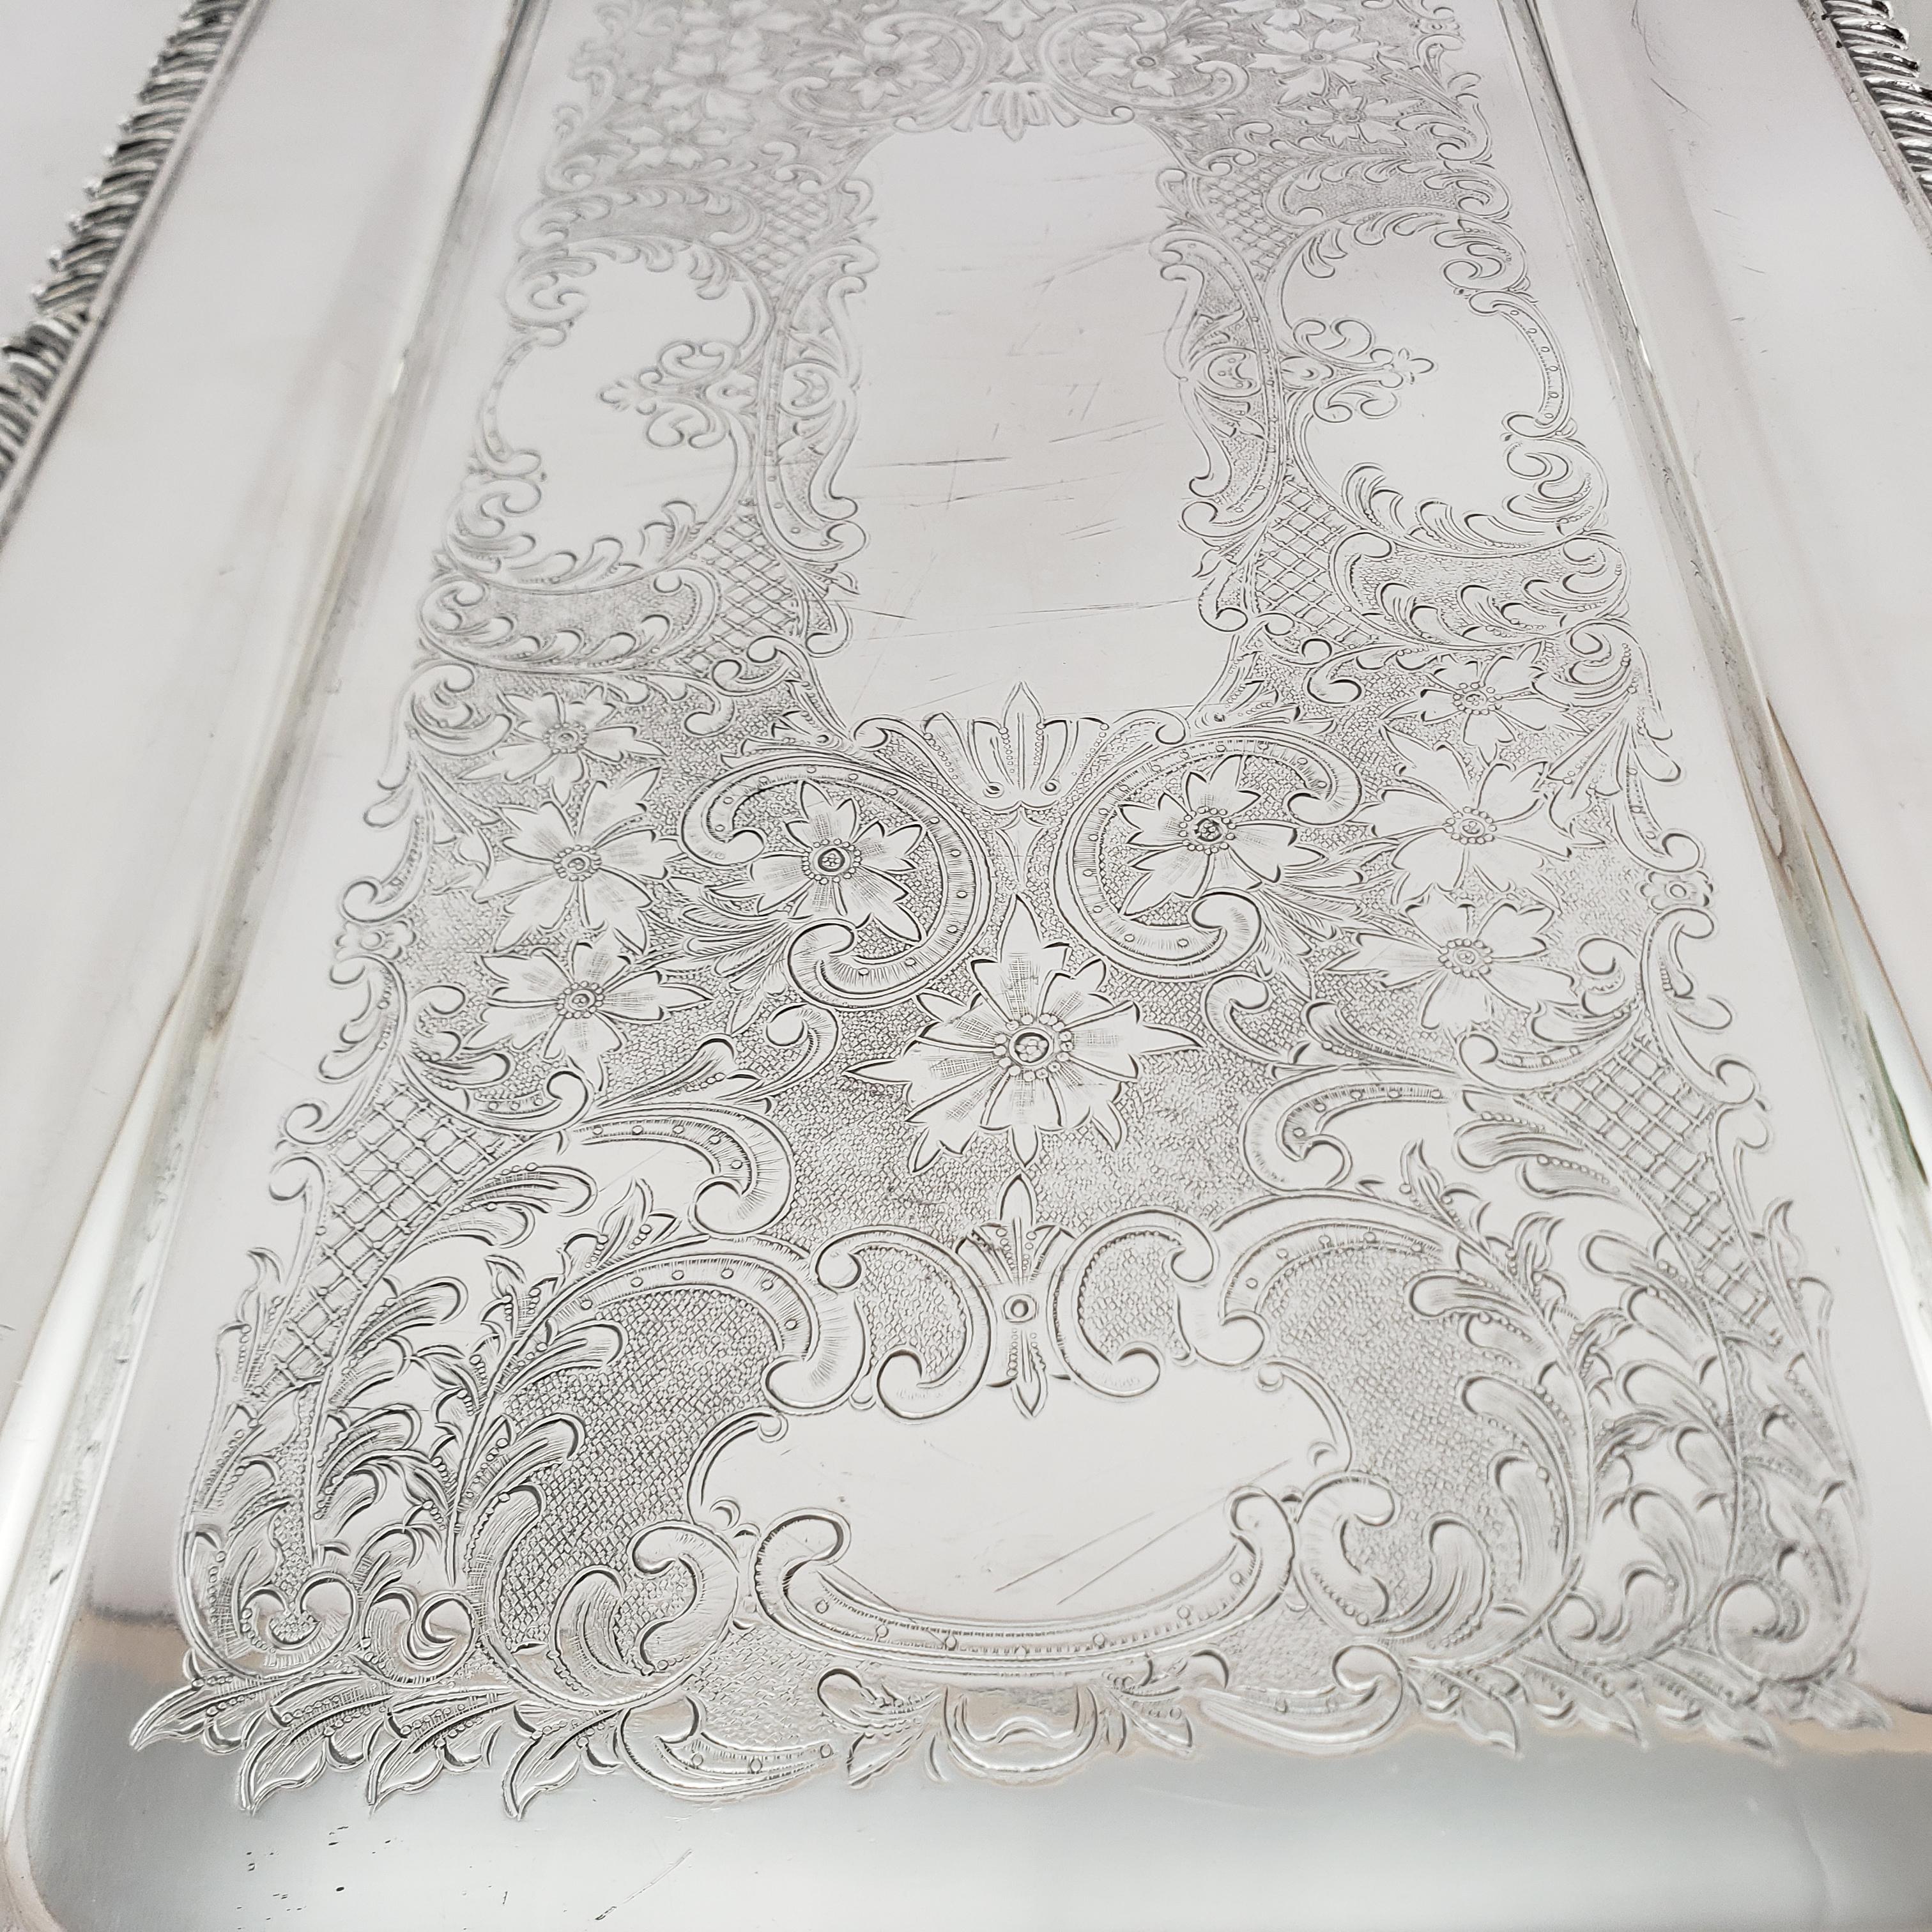 Antique Rectangular Silver Plated Serving Tray with Stylized Rope Decoration For Sale 2